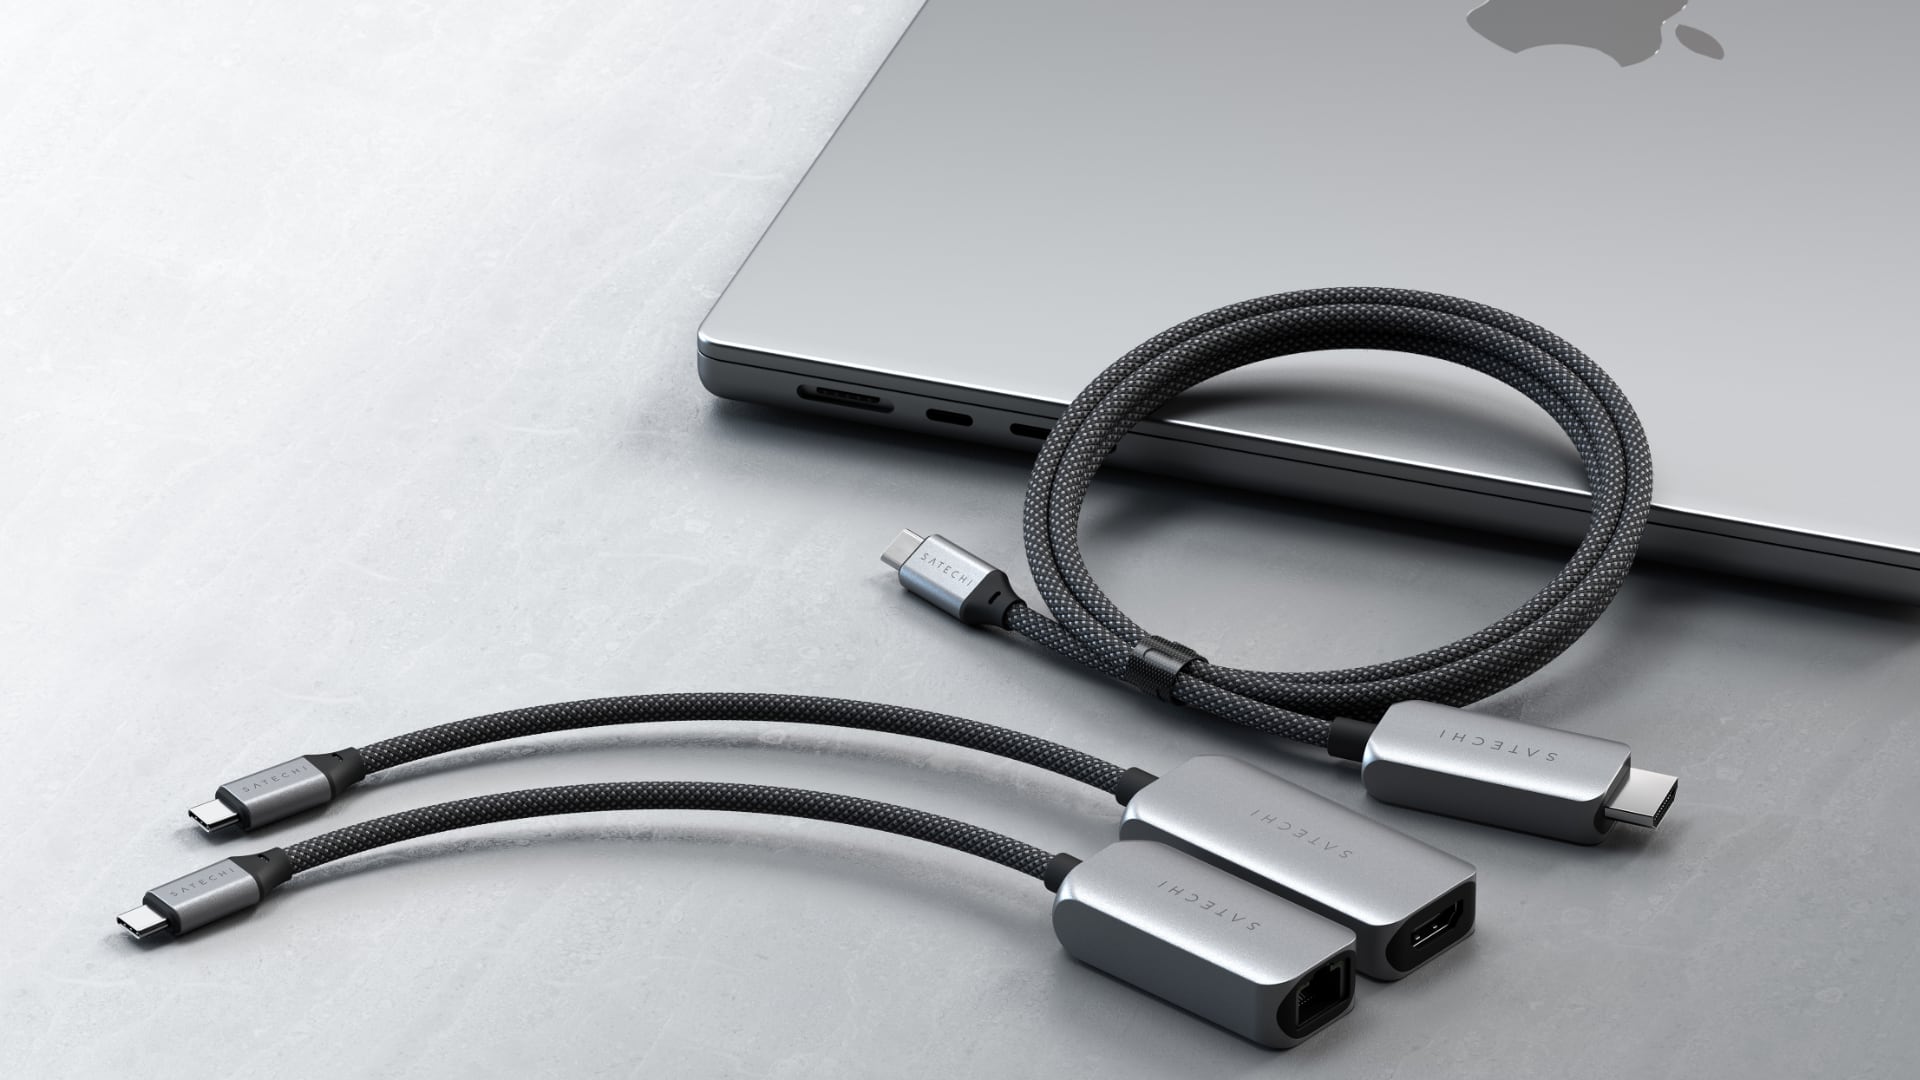 Satechi’s latest USB-C accessories for 8K HDMI video and 2.5 Gigabit Ethernet